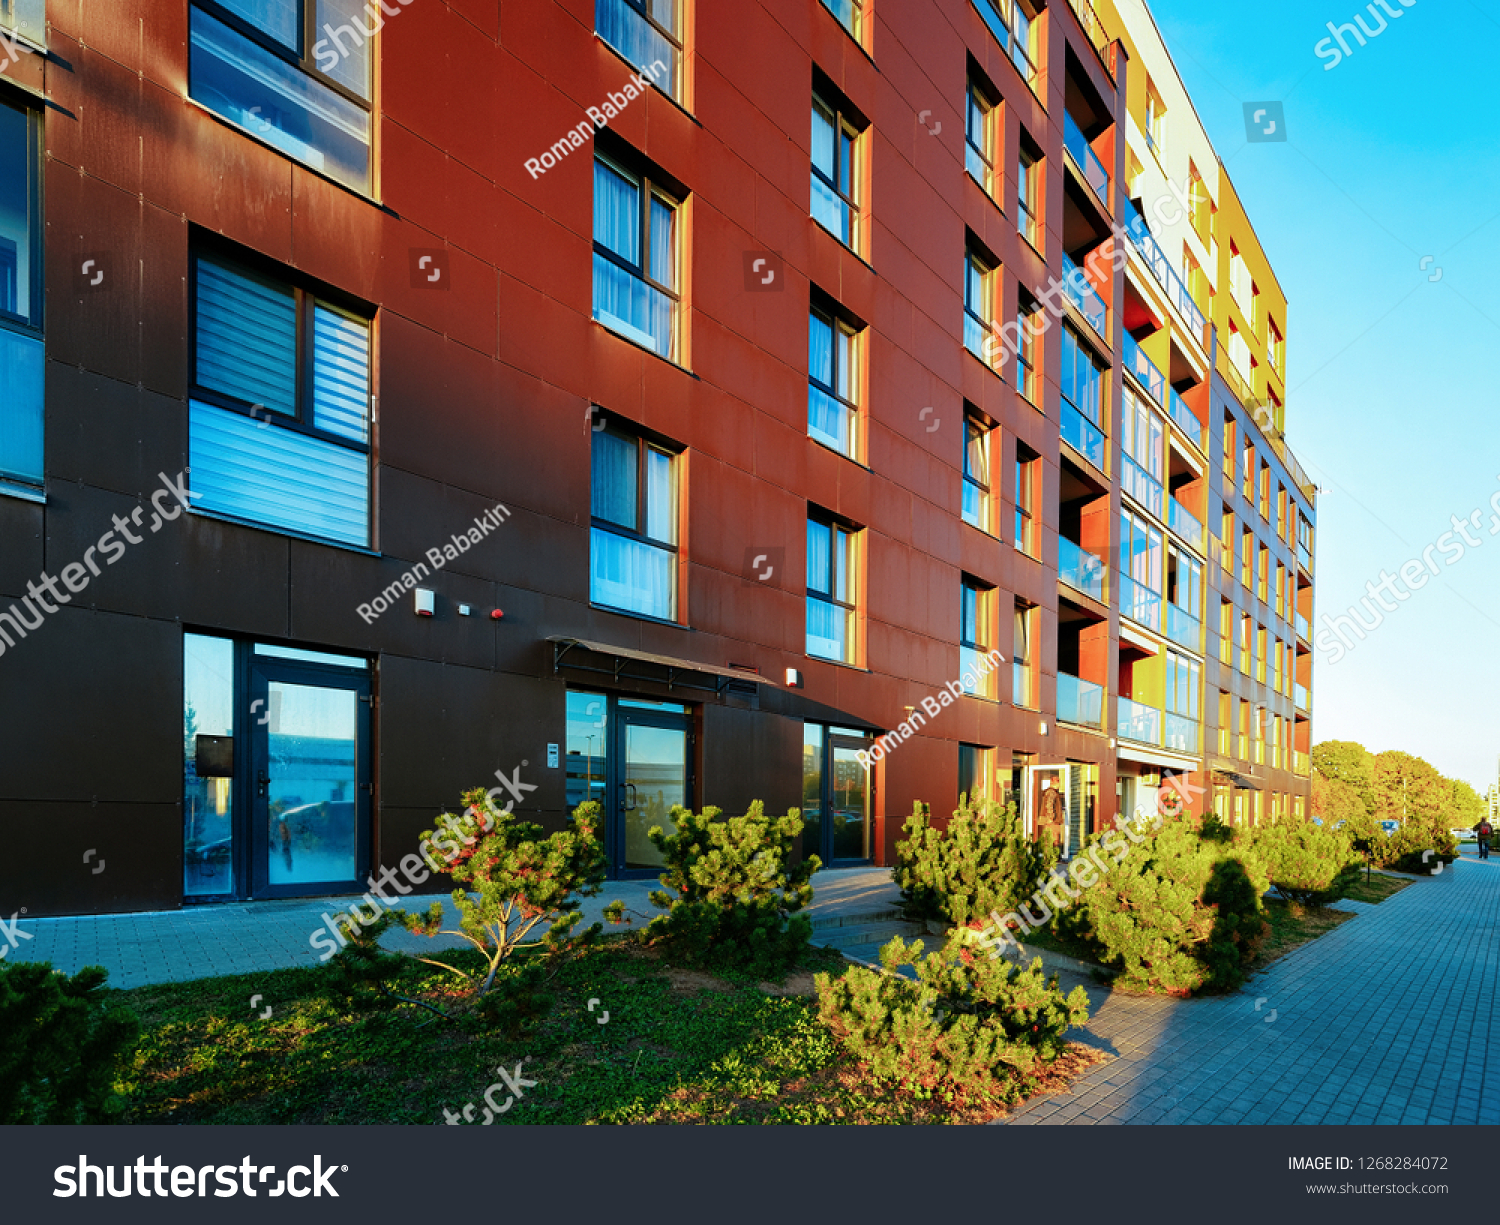 Vilnius, Lithuania - October 9, 2018: Residential Apartment homes facade architecture with outdoor facilities. Blue sky on the background. #1268284072